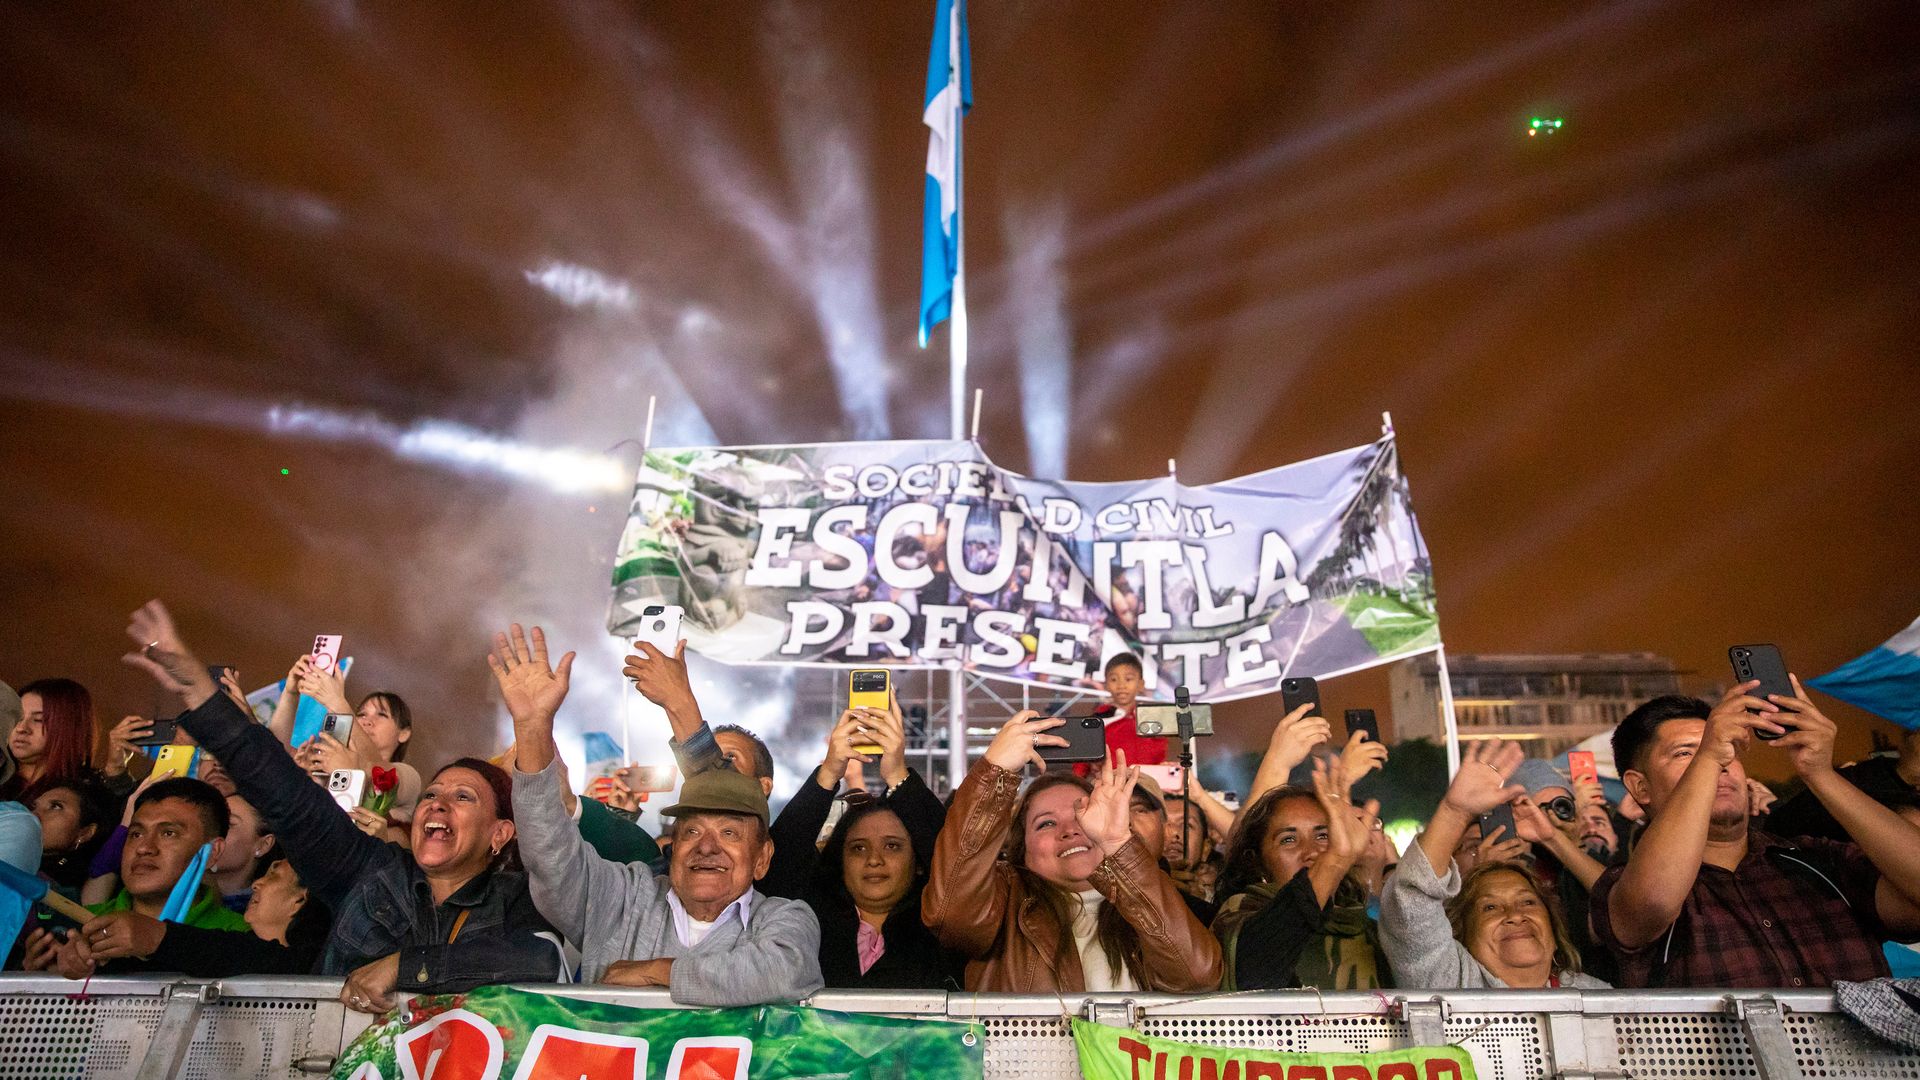 people who are lined up behind barriers raise their hands and cheer as President Bernardo Arévalo was inaugurated on Sunday. It is nighttime and fireworks are going off in the background.